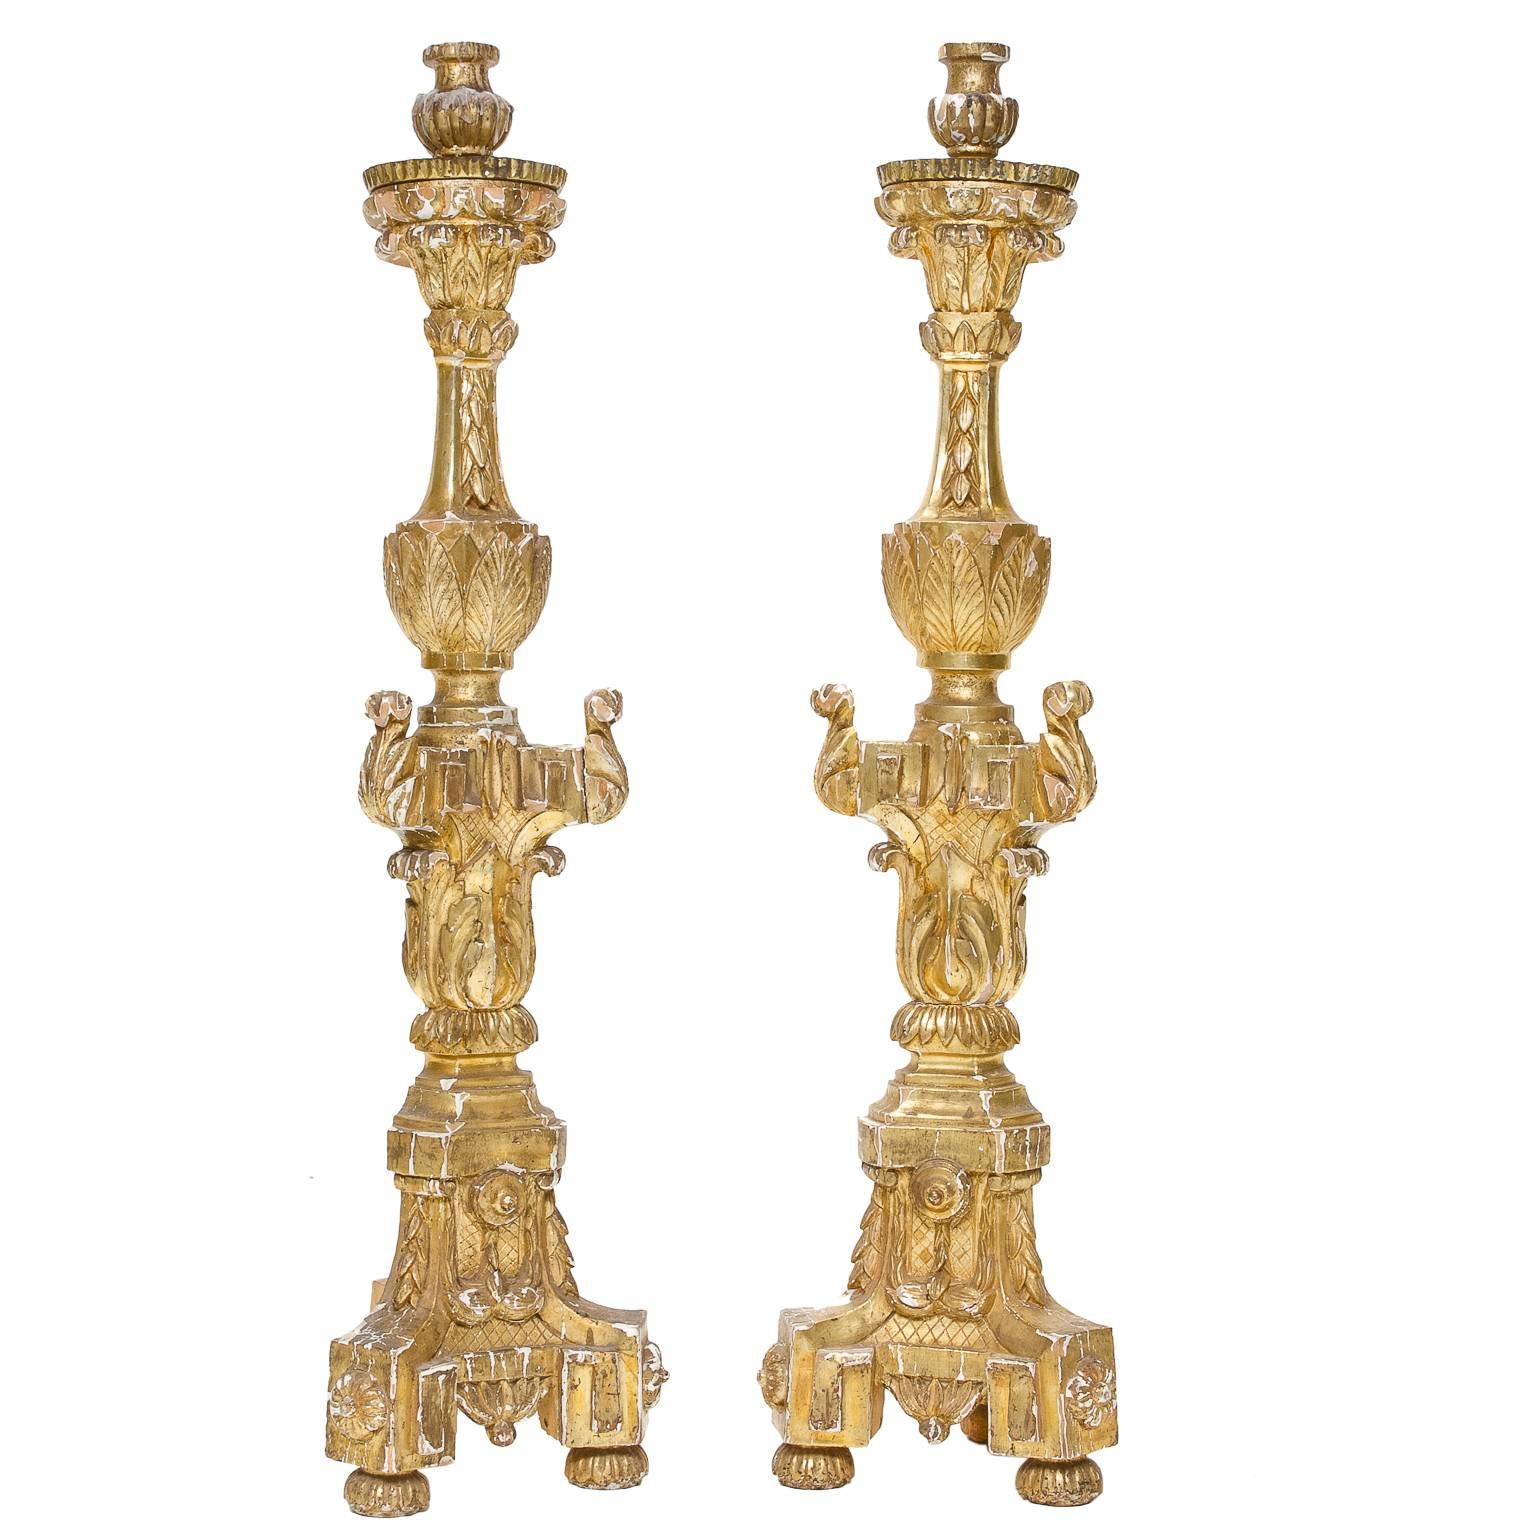 Early 19th Century, French Altar Candlesticks